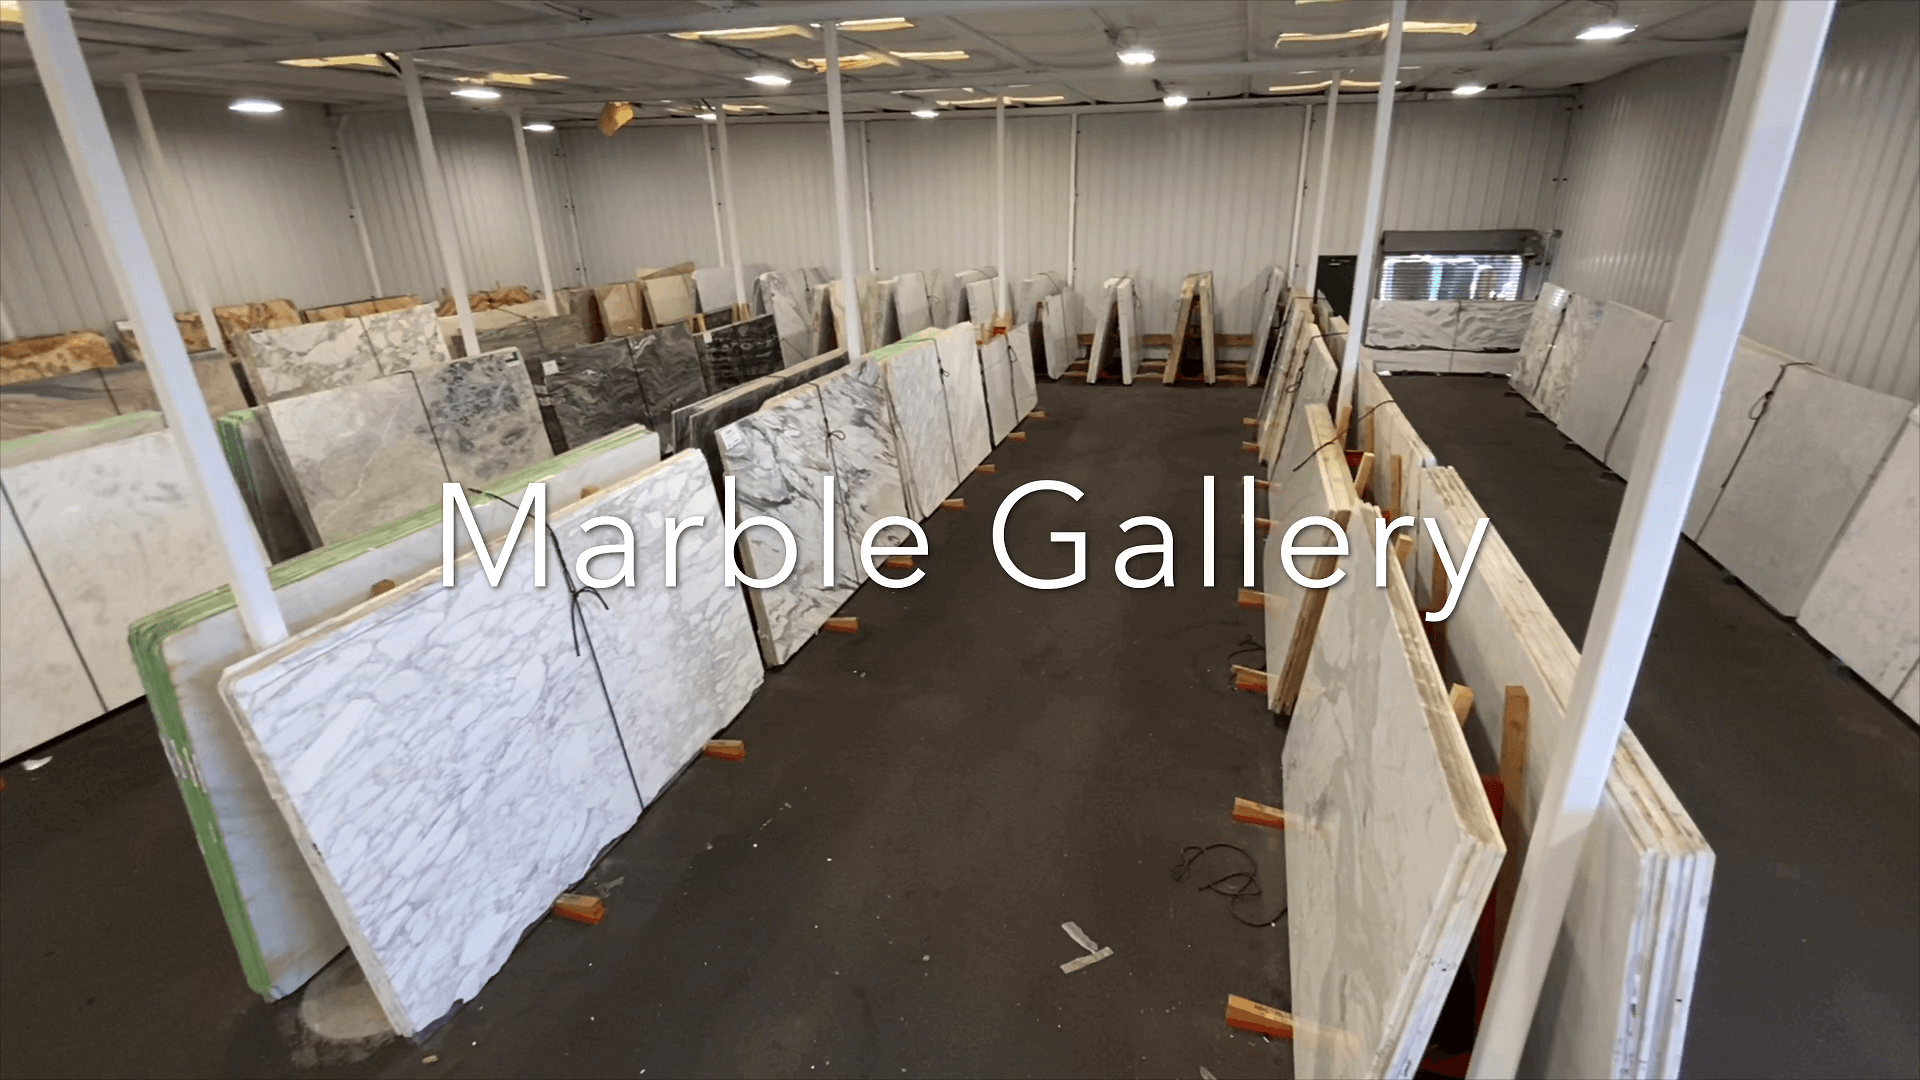 MARBLE GALLERY AT STONEVILLE USA